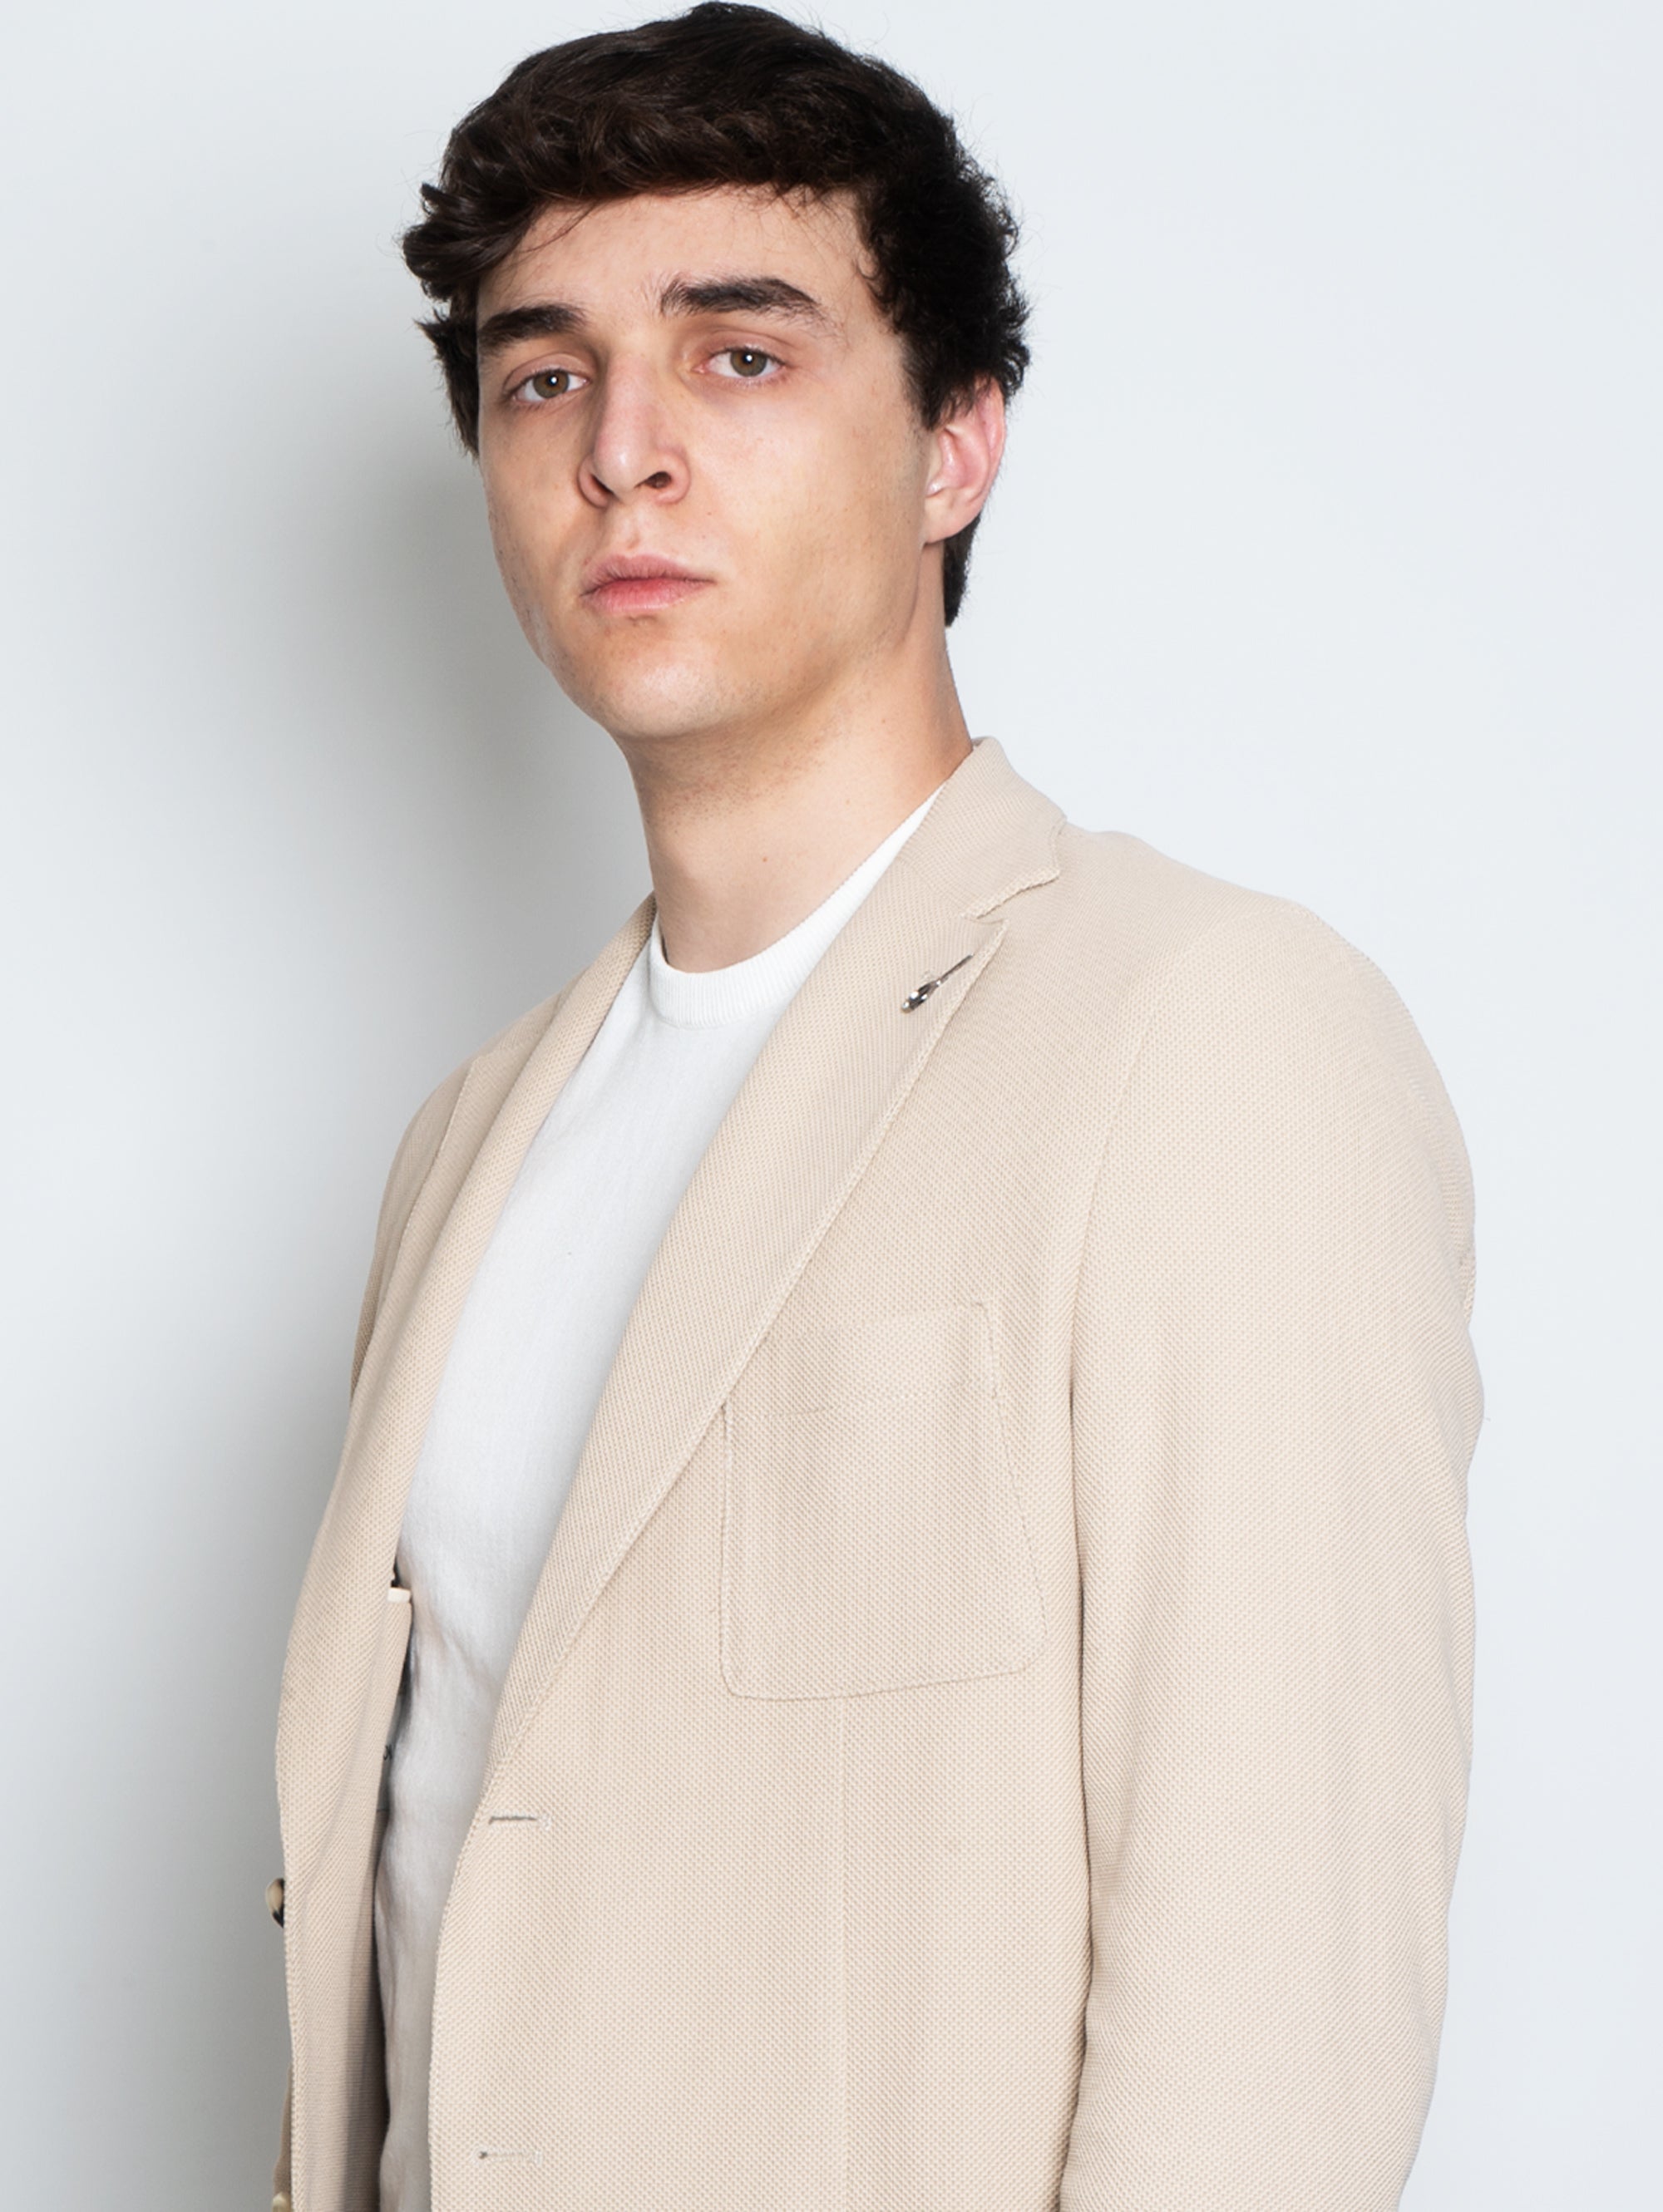 Jersey Jacket with Beige Honeycomb Processing